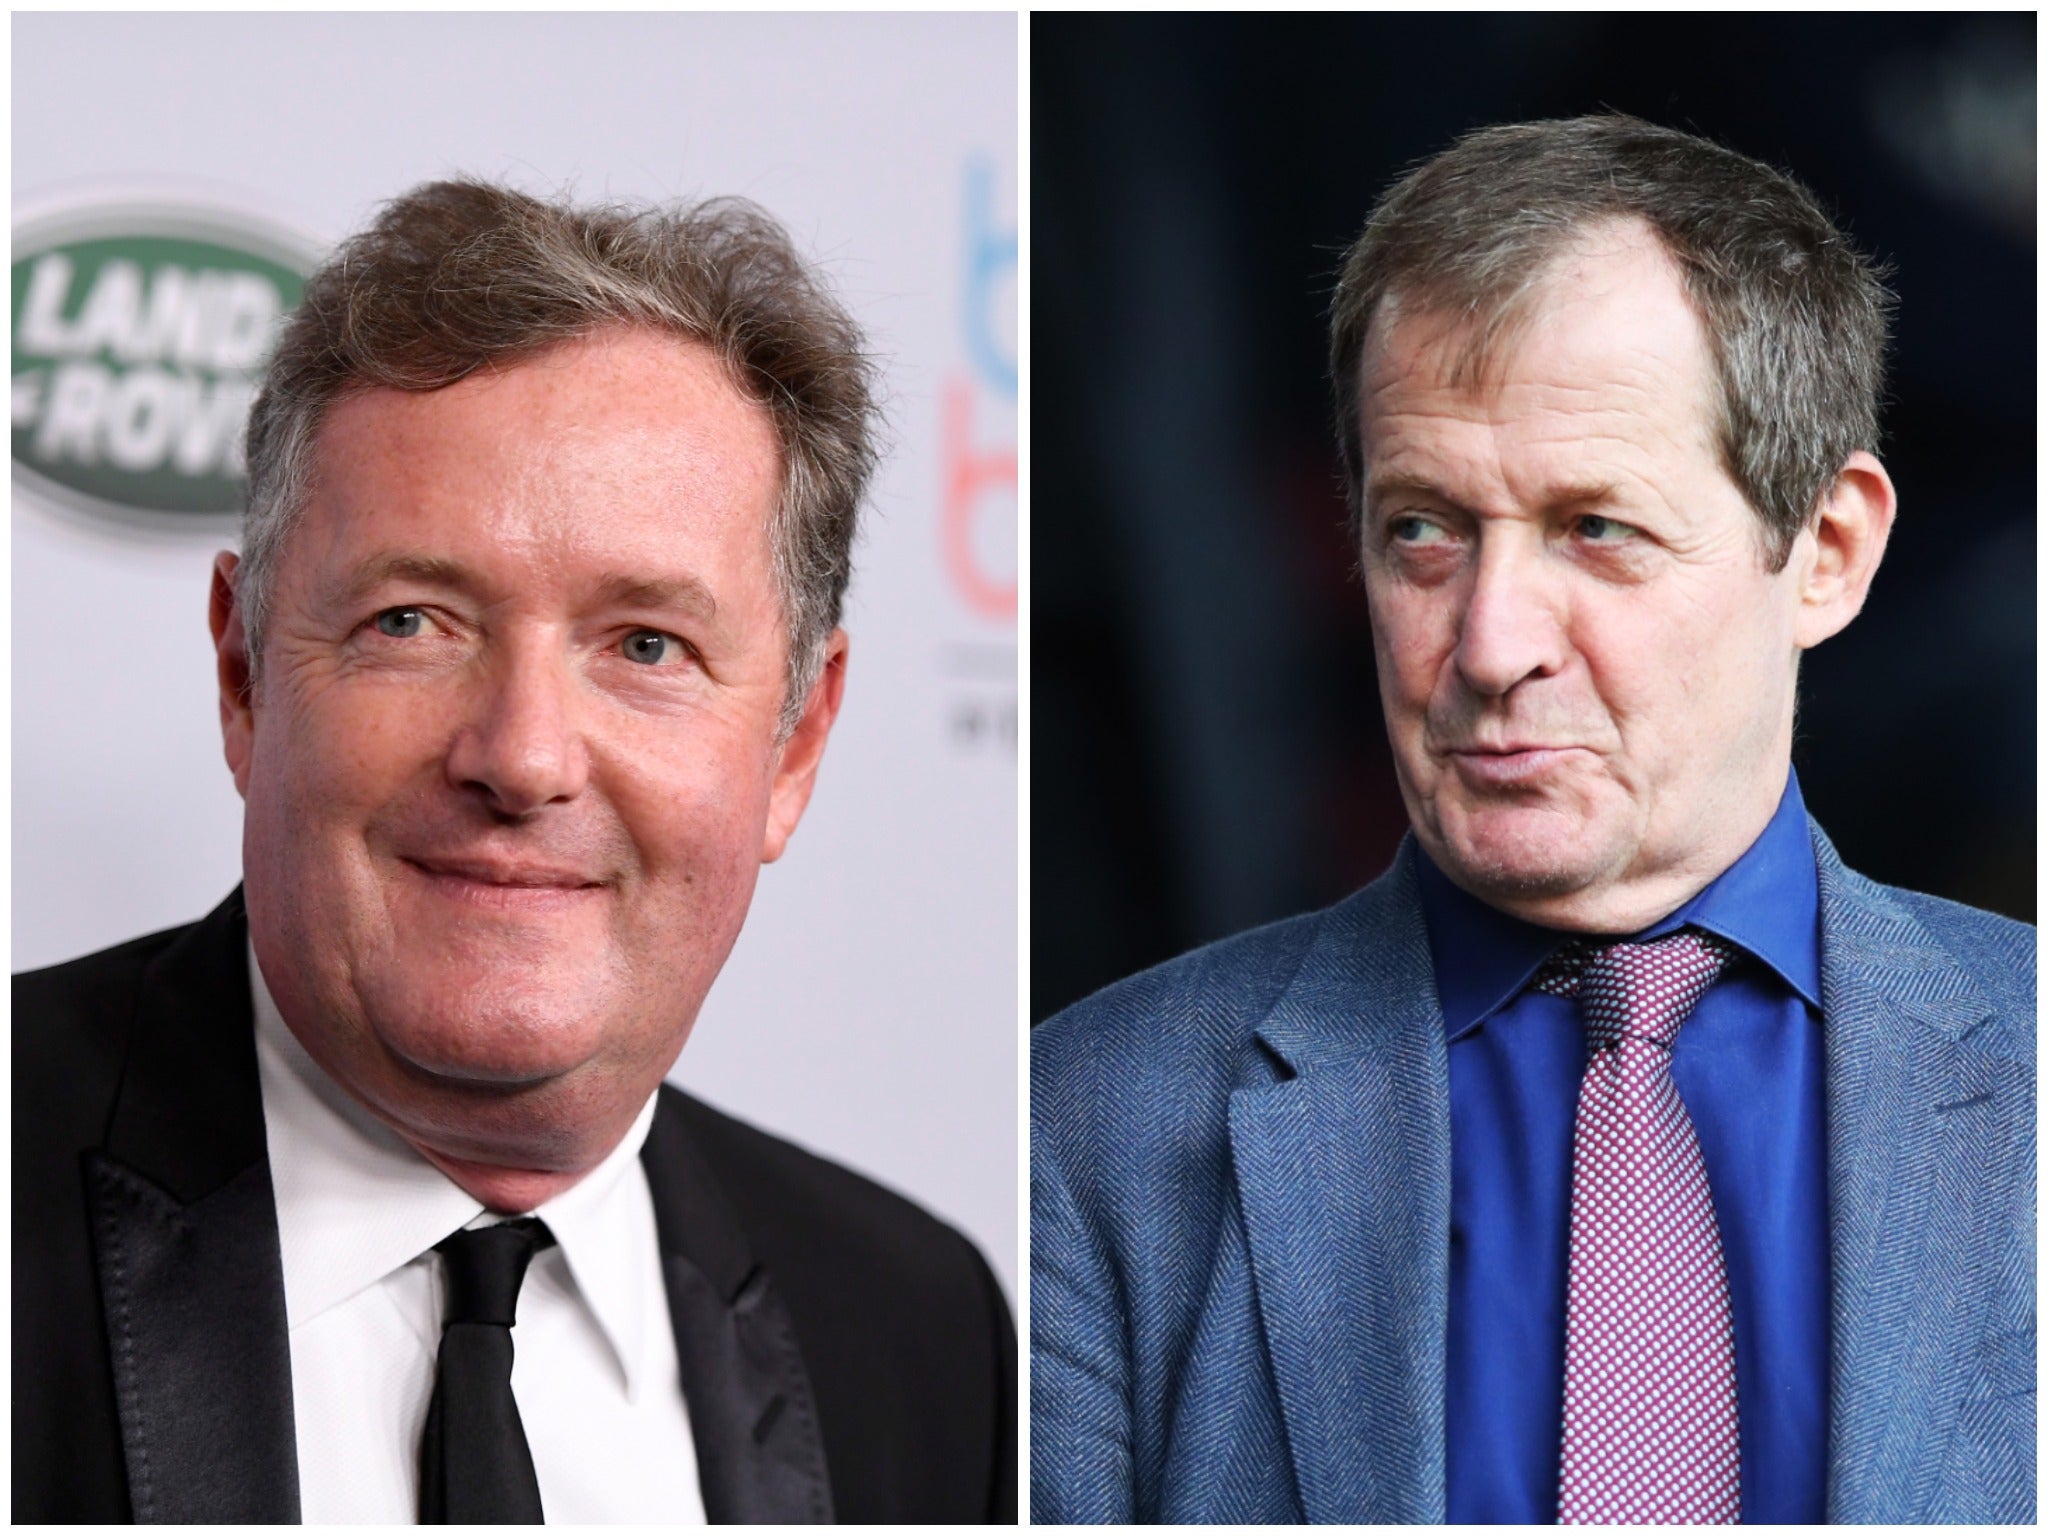 Alastair Campbell, right, will co-present Good Morning Britain for a few days next month. Piers Morgan, right, left the programme in March